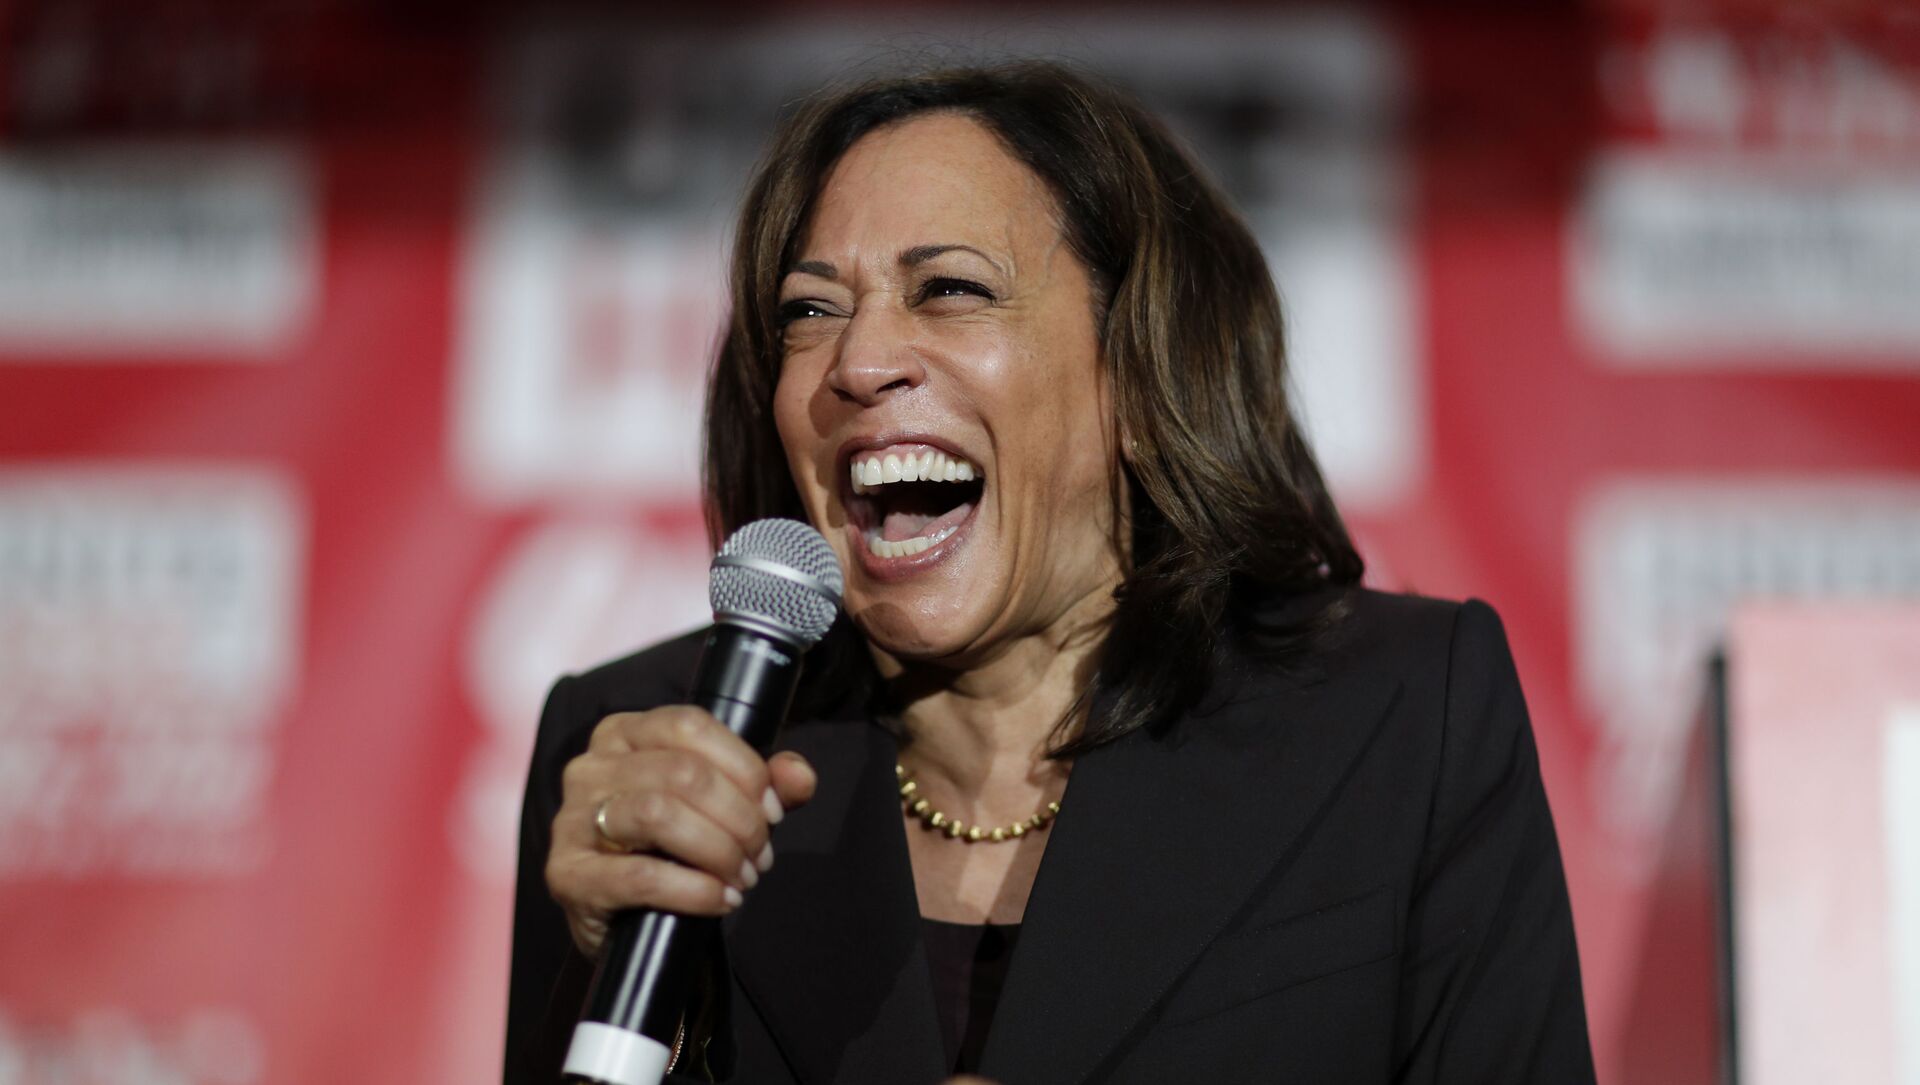 In this Nov. 8, 2019, file photo, then-Democratic presidential candidate Sen. Kamala Harris, D-Calif., reacts as she speaks at a town hall event at the Culinary Workers Union in Las Vegas. Democratic presidential candidate former Vice President Joe Biden has chosen  Harris as his running mate. - Sputnik International, 1920, 31.03.2021